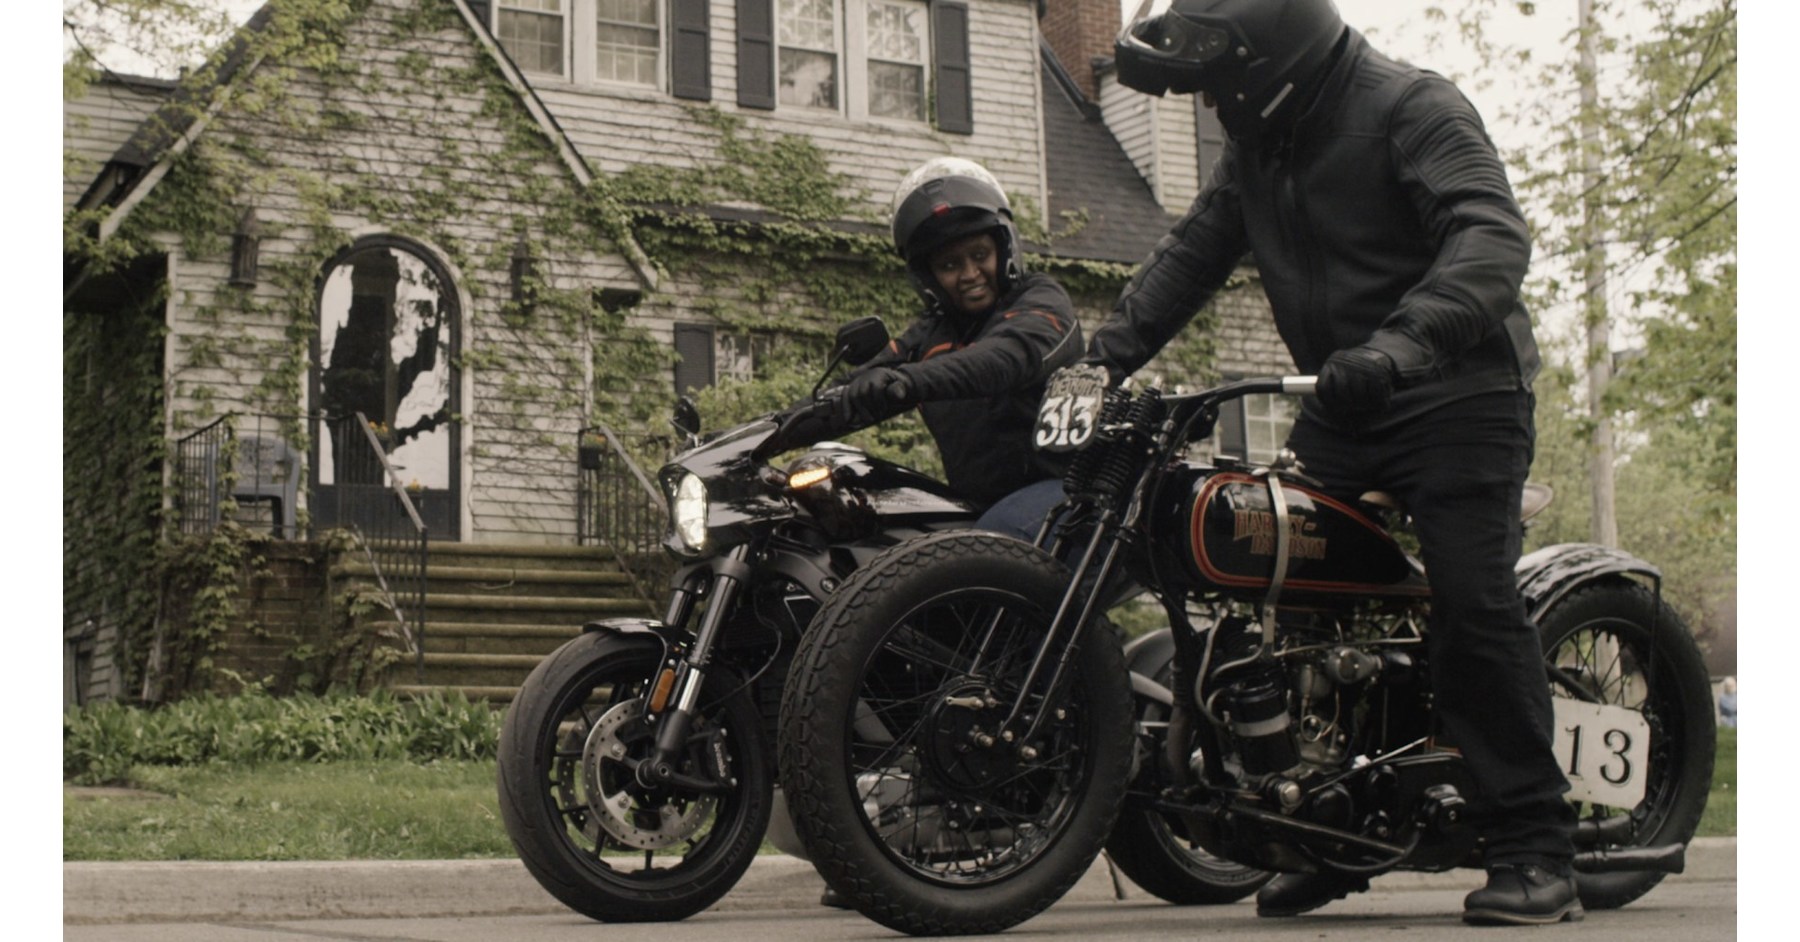 Harley Davidson And Jason Momoa Collaborate During Social Distancing To Celebrate The Power Of Riding